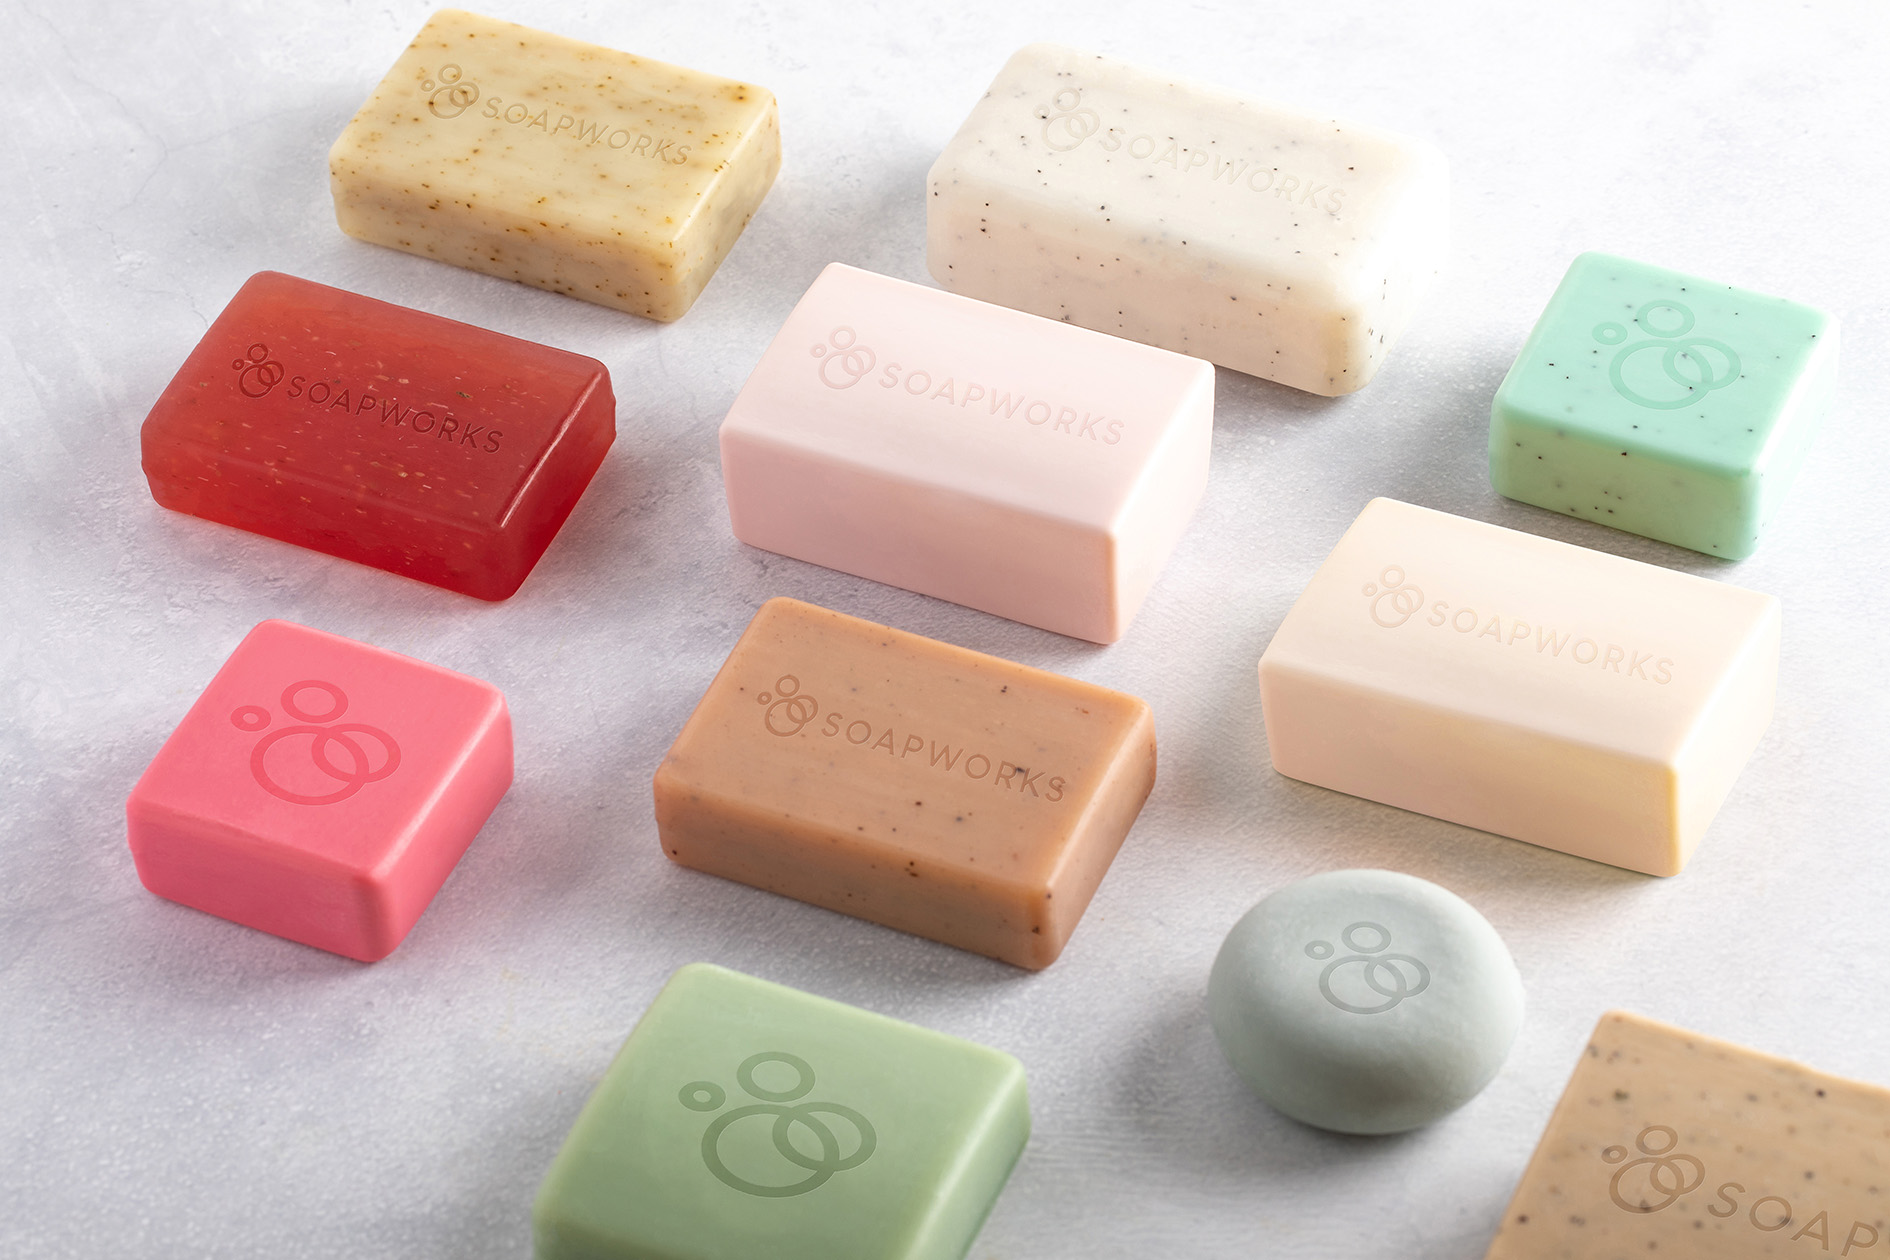 Selection of Soapworks products